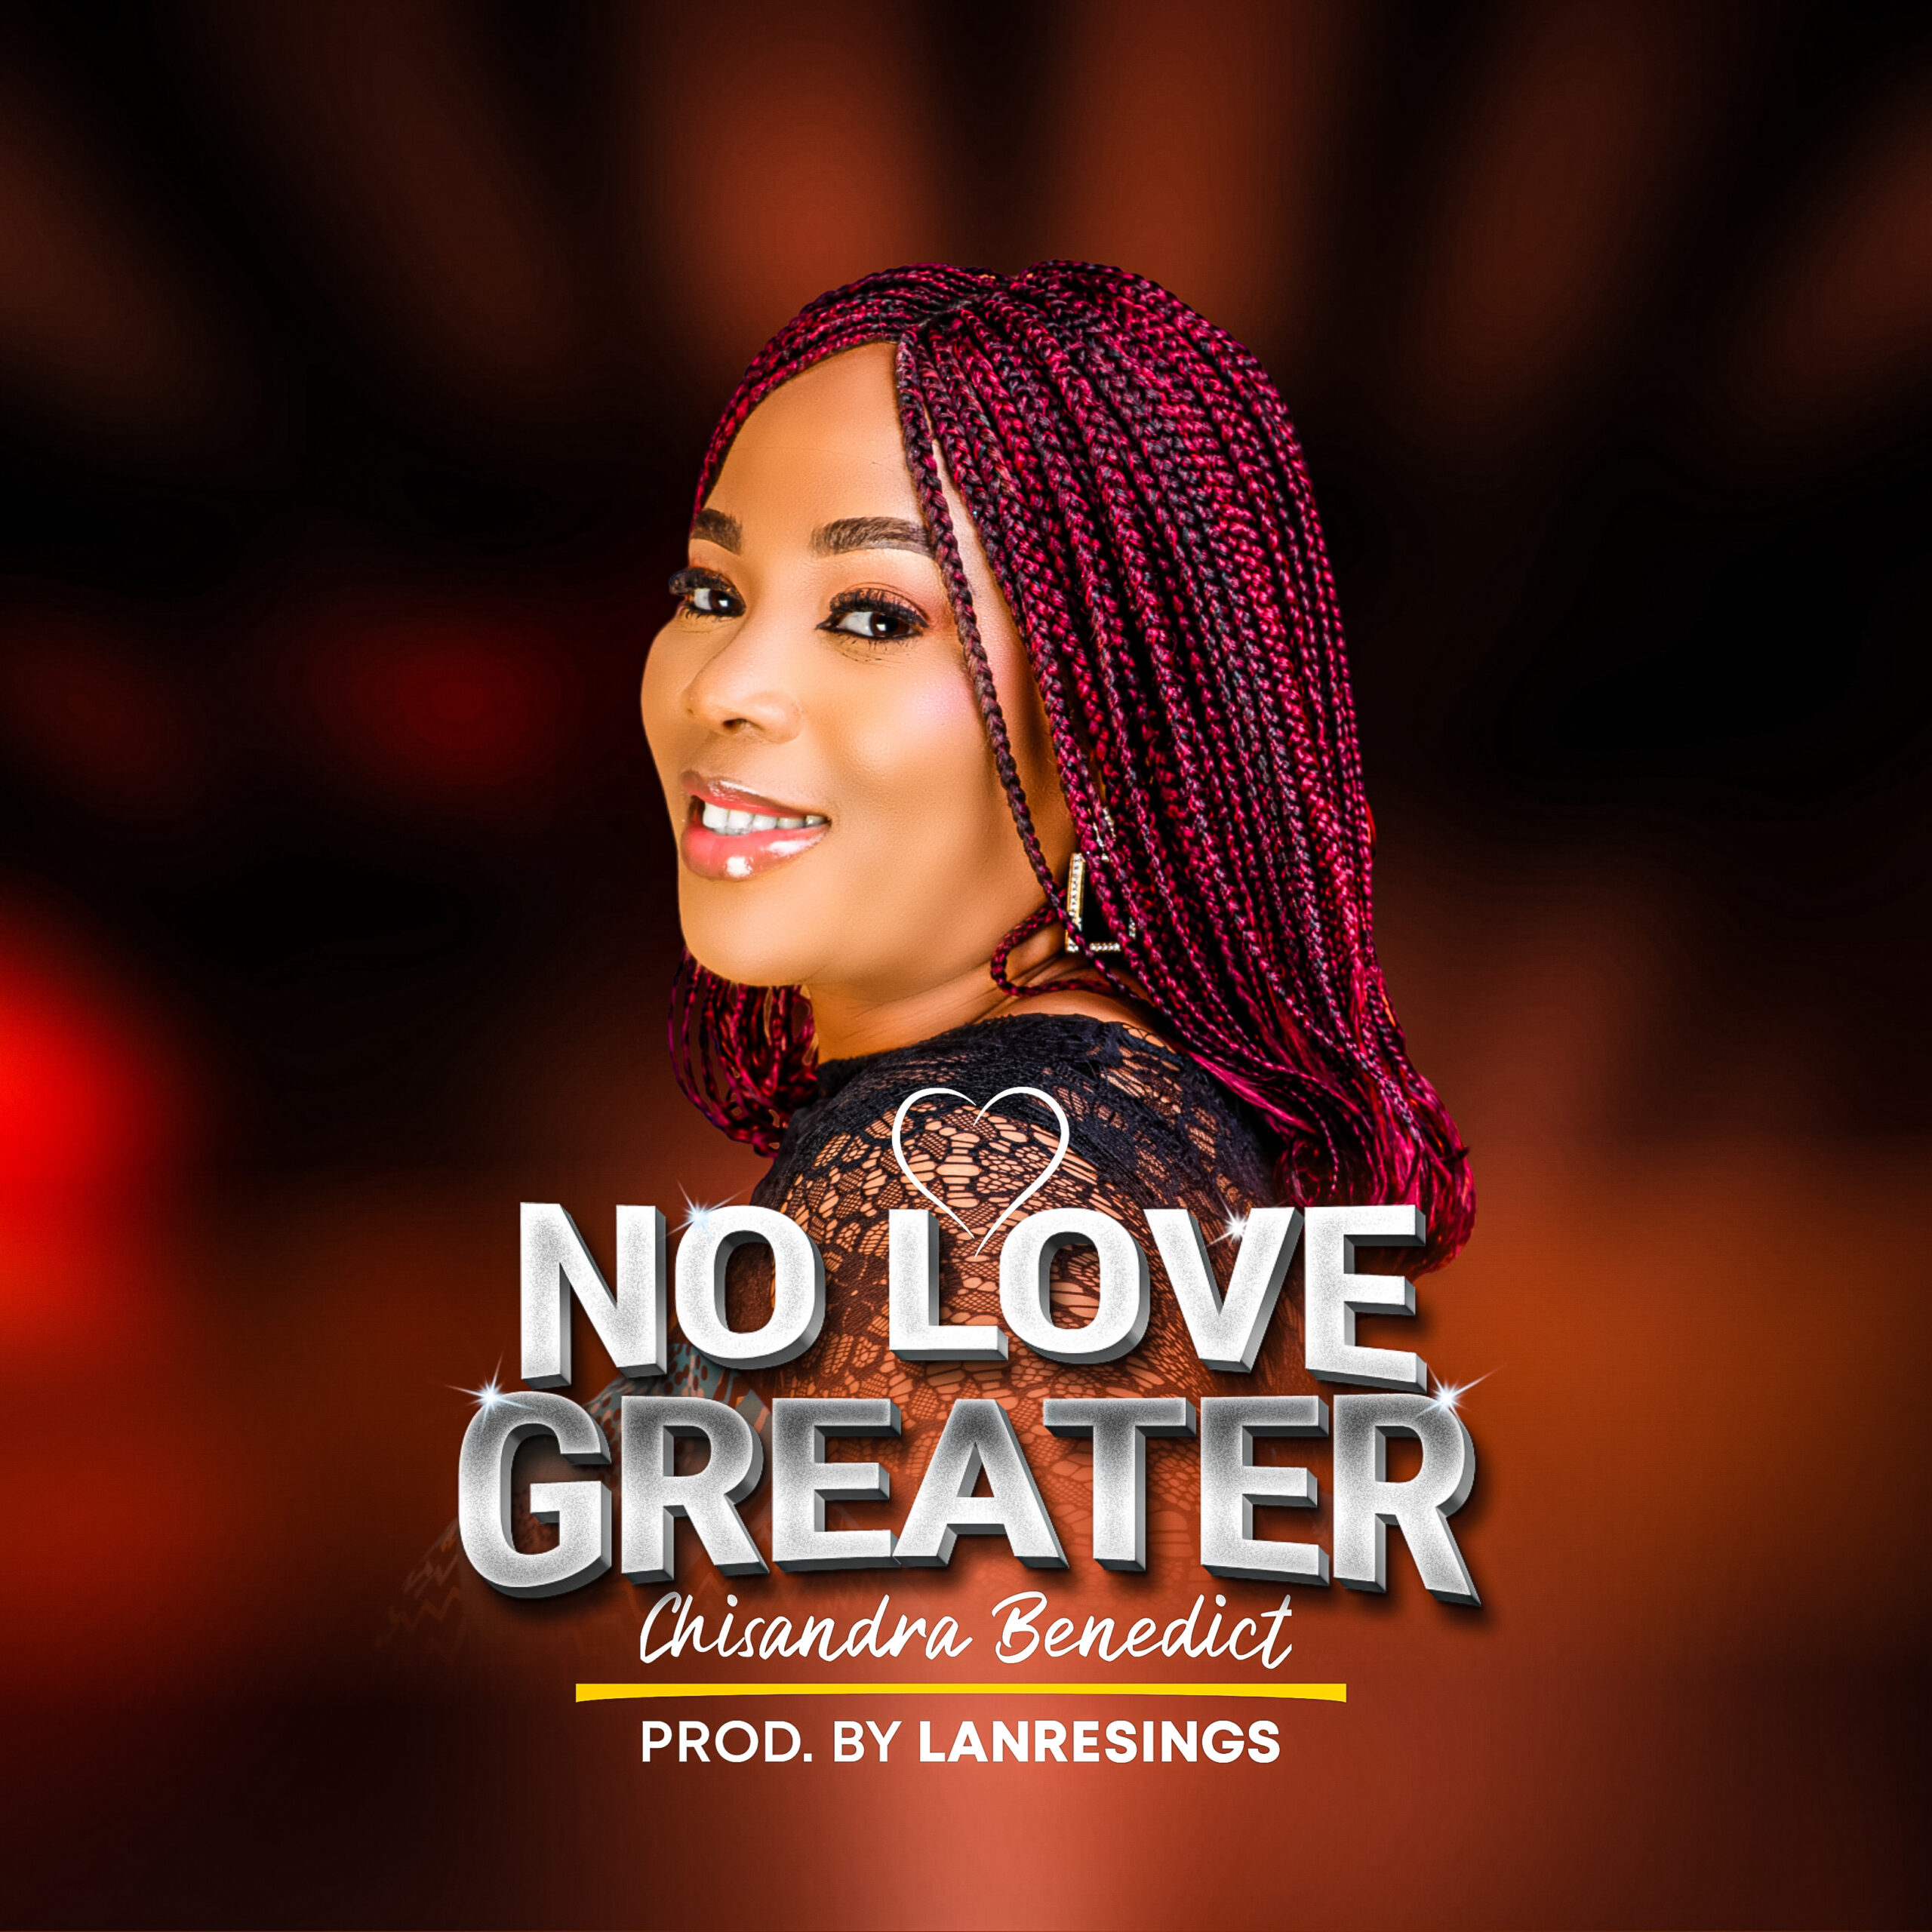 No Love Greater by Chisandra Benedict